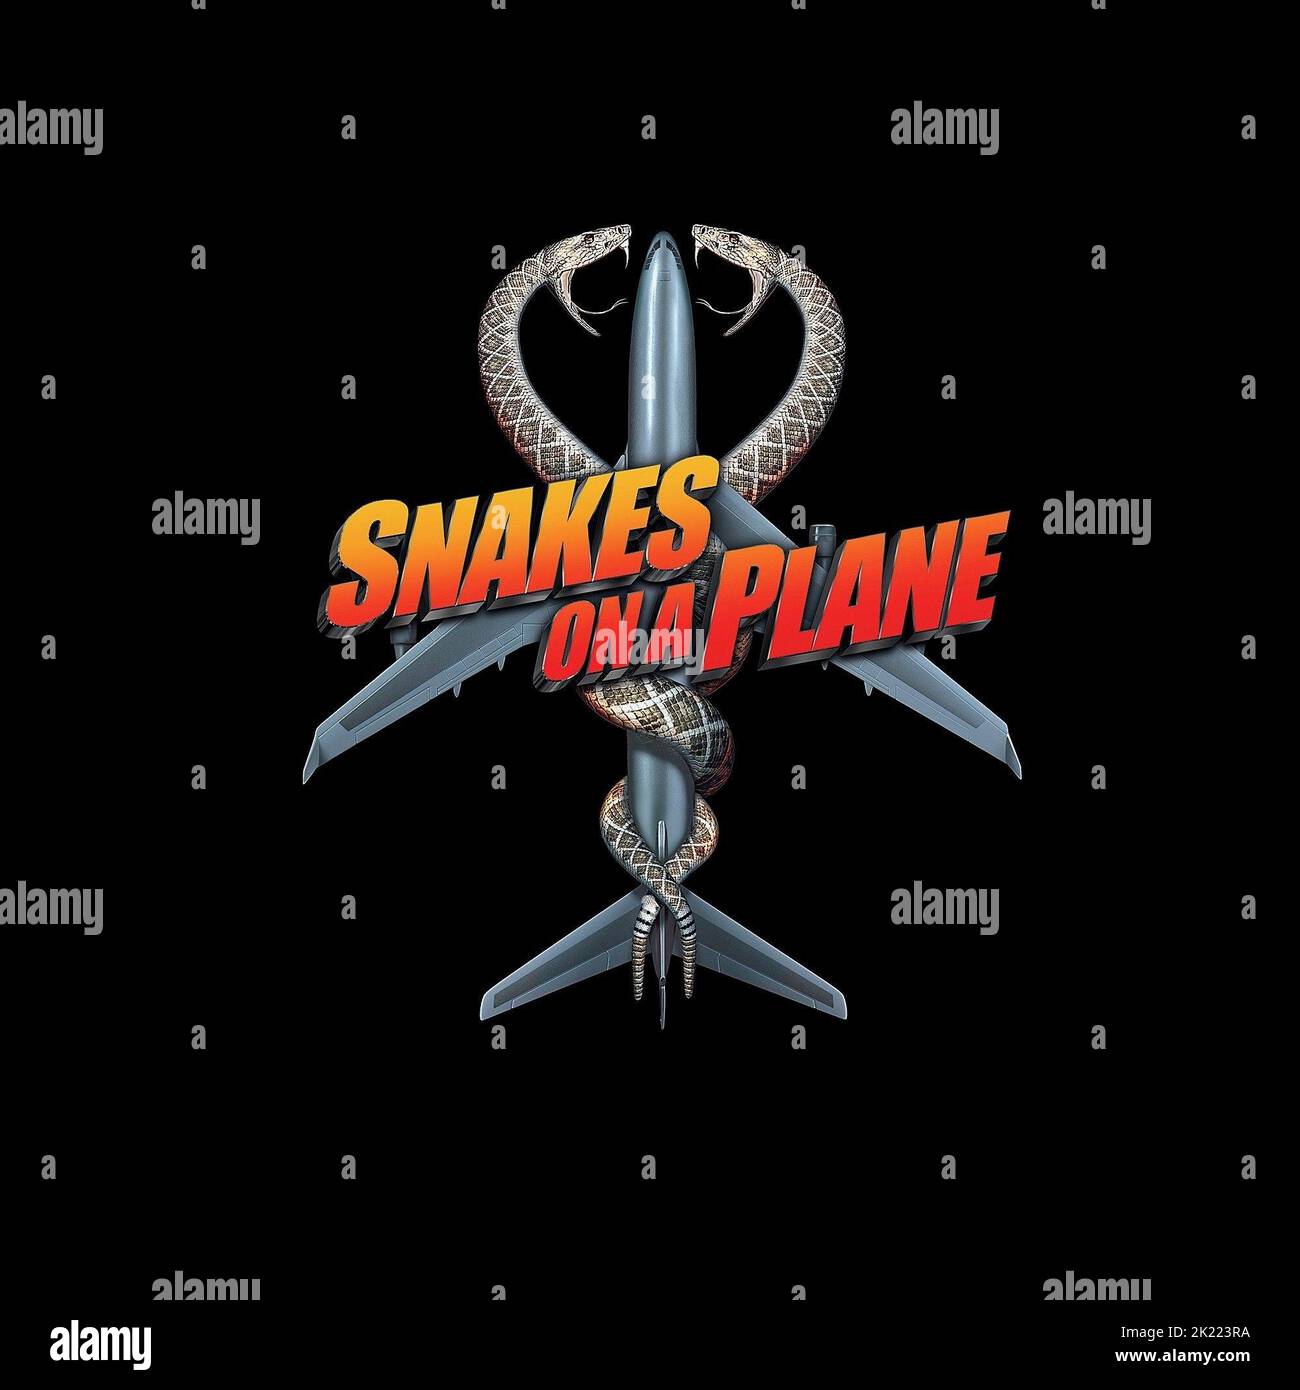 MOVIE POSTER, SNAKES ON A PLANE, 2006 Stock Photo